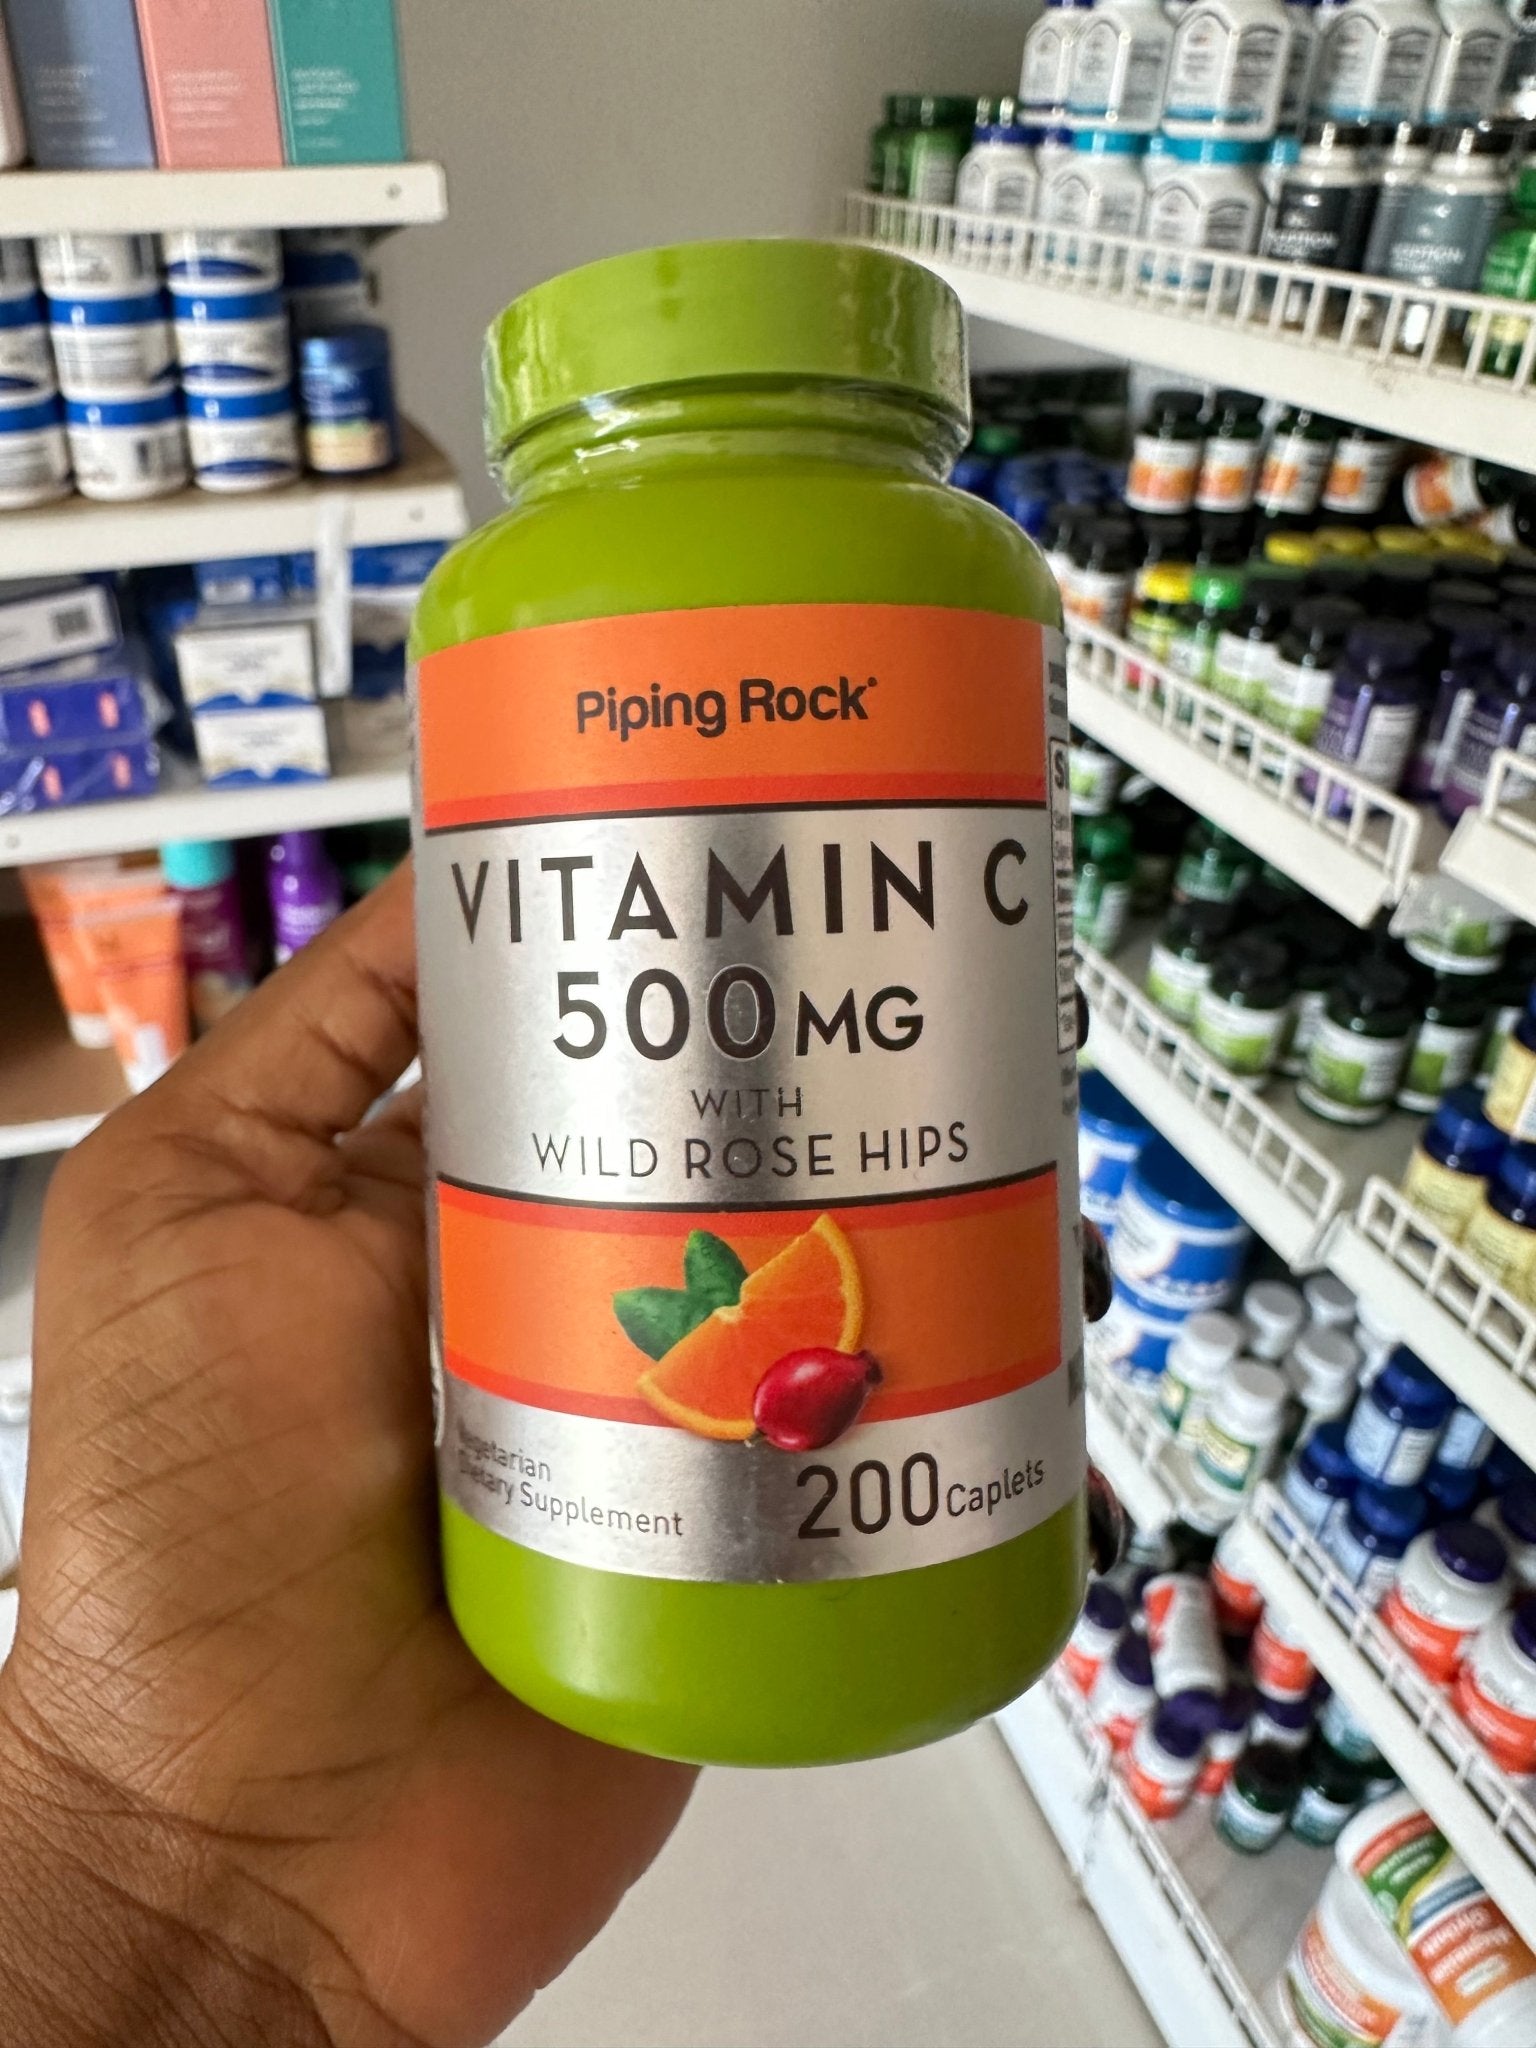 PipingRock Vitamin C 500 mg with Wild Rose Hips | 200 Caplets Exp 12/2026 - Ome's Beauty Mart